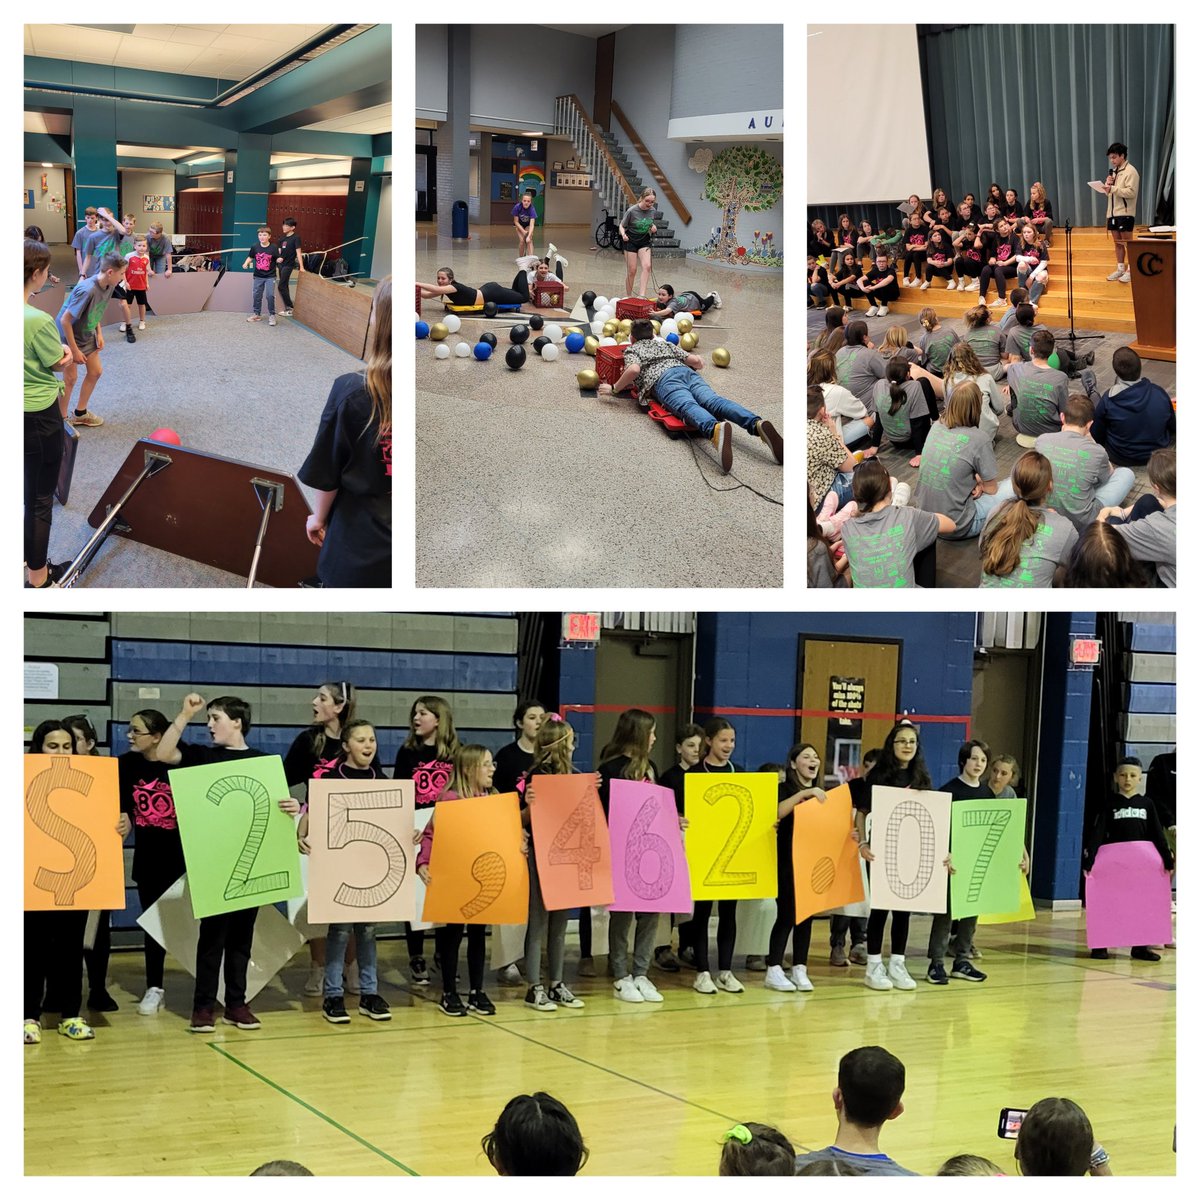 Favorite night of the school year- 14th #CCMS #miniTHON @fourdiamonds! Awesome night of fun, and $25,462.07 raised #FTK! Thanks to @RodkeyReading, students, and staff for your support! @MrBurtonCLSD @CCMS_PSP